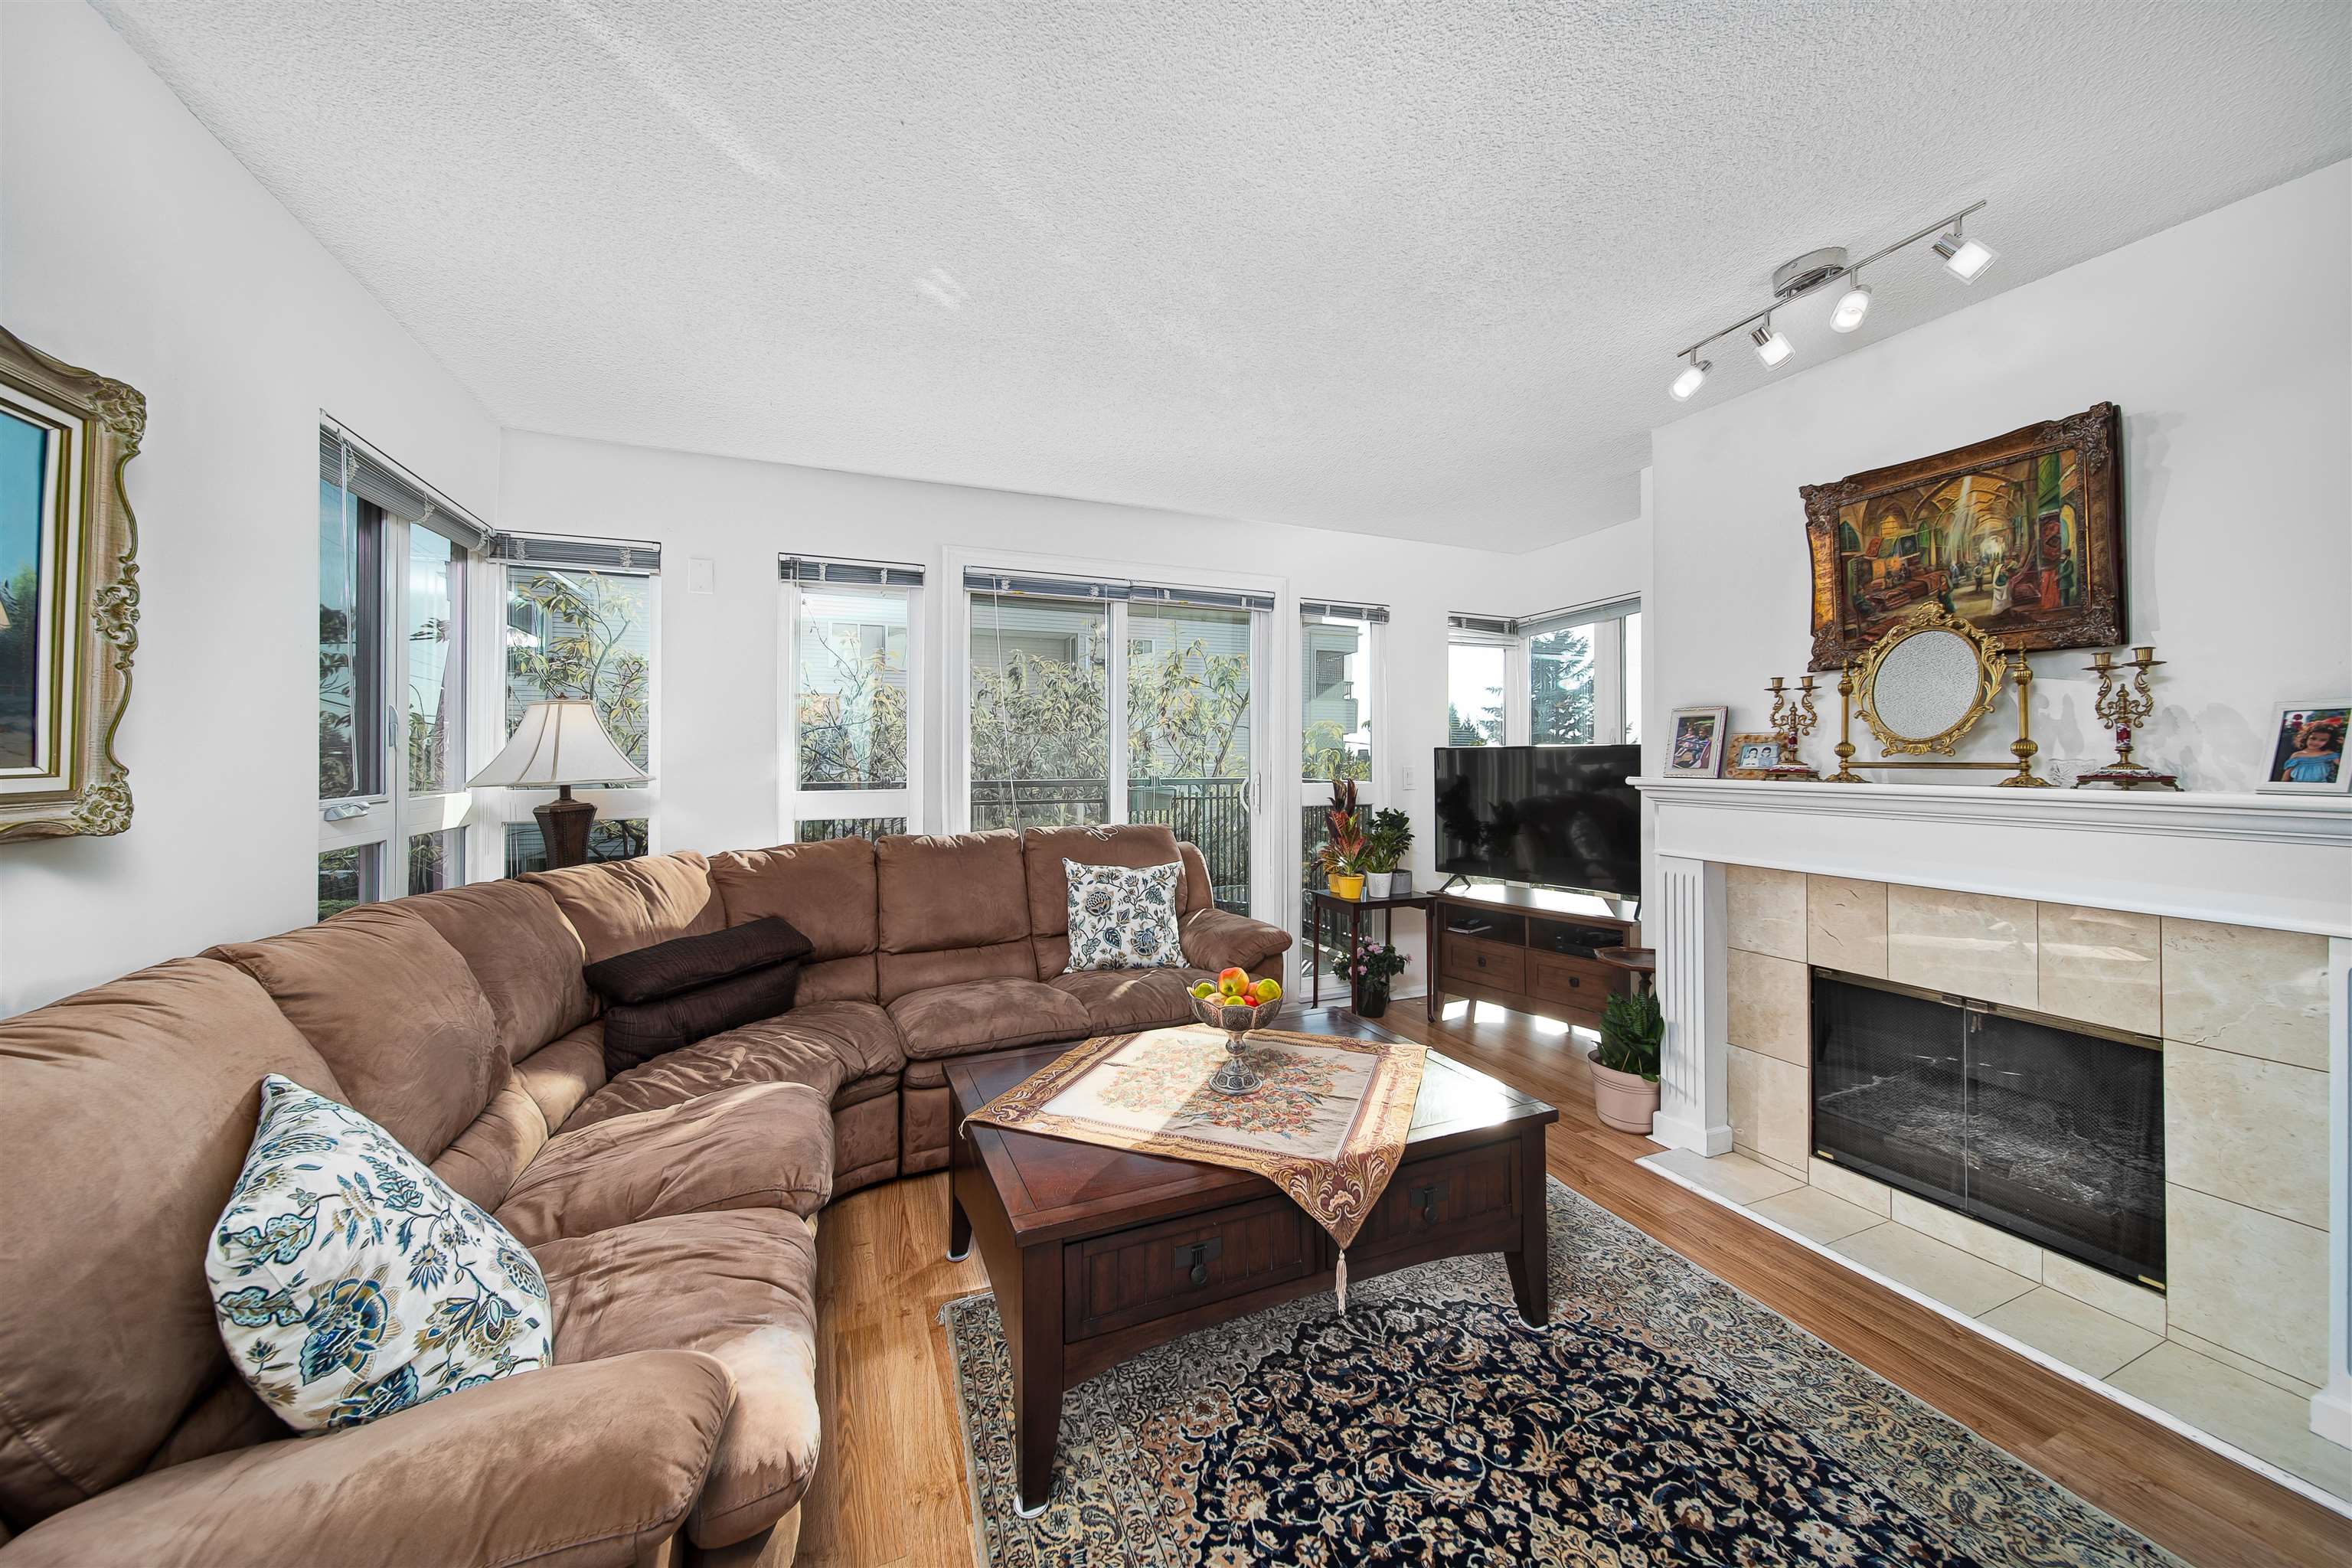 Listing image of 205 106 W KINGS ROAD